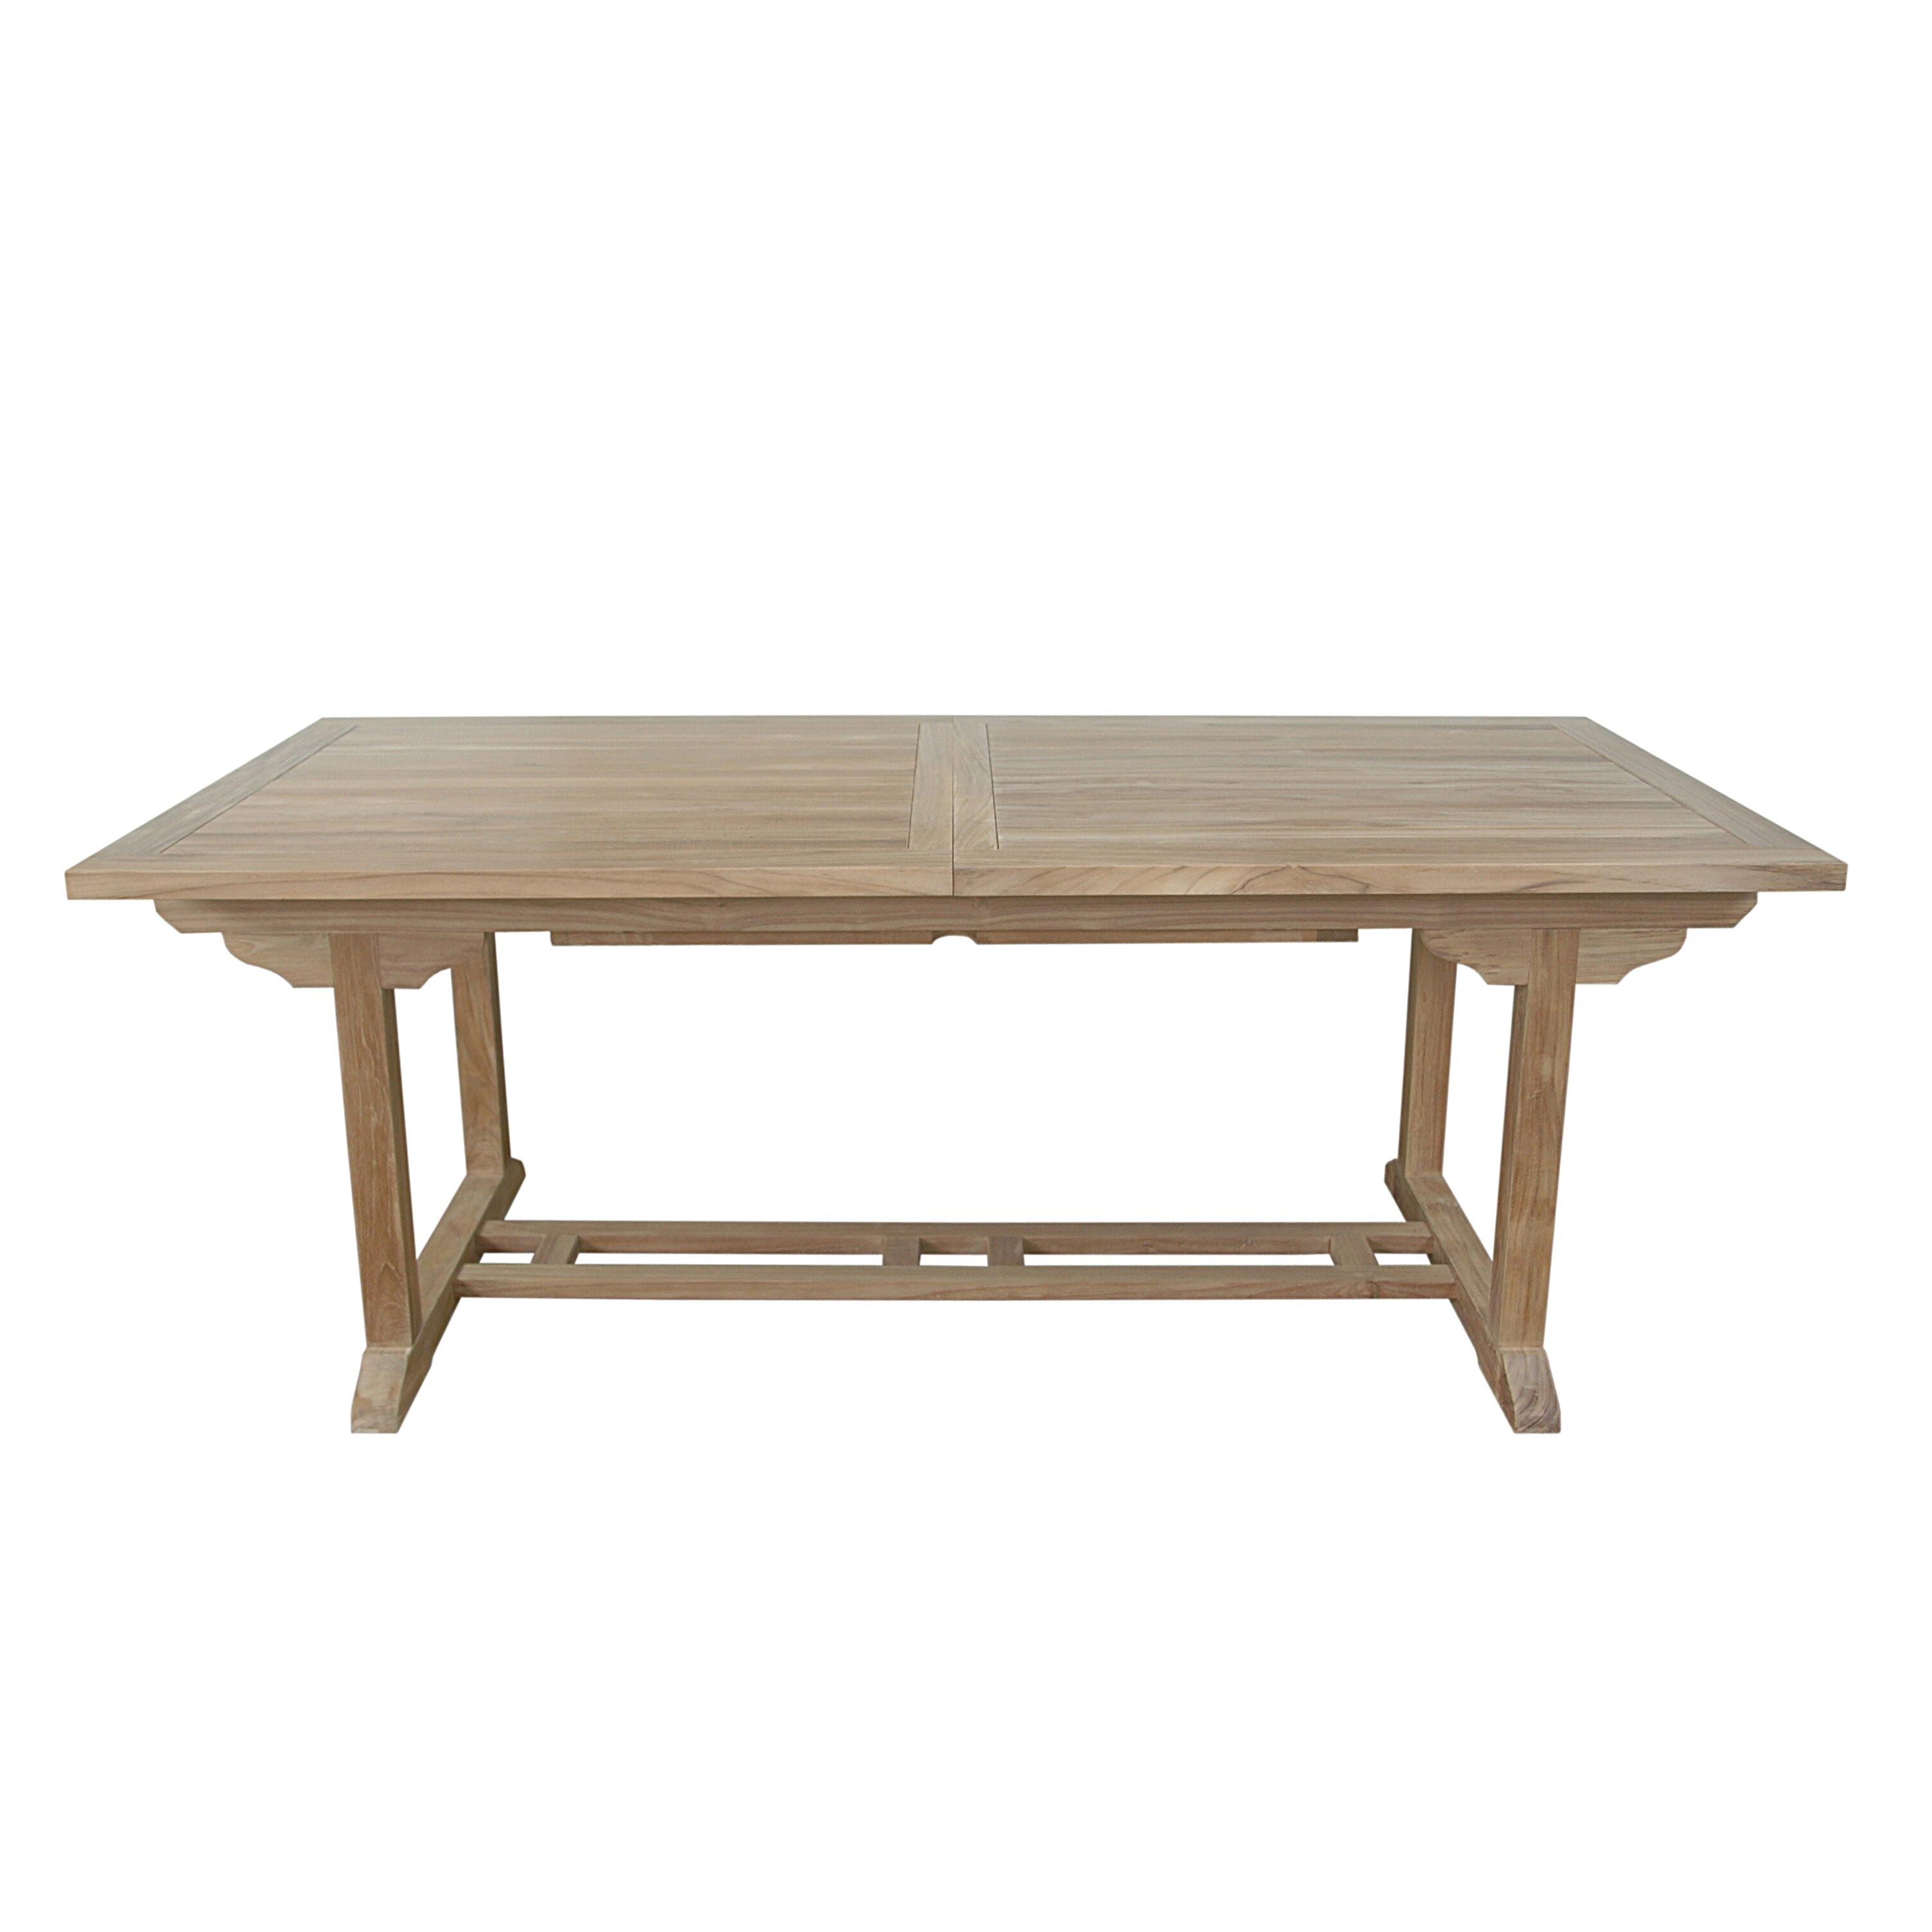 Beachcrest Home Milena Rectangular Extension Dining Table ...